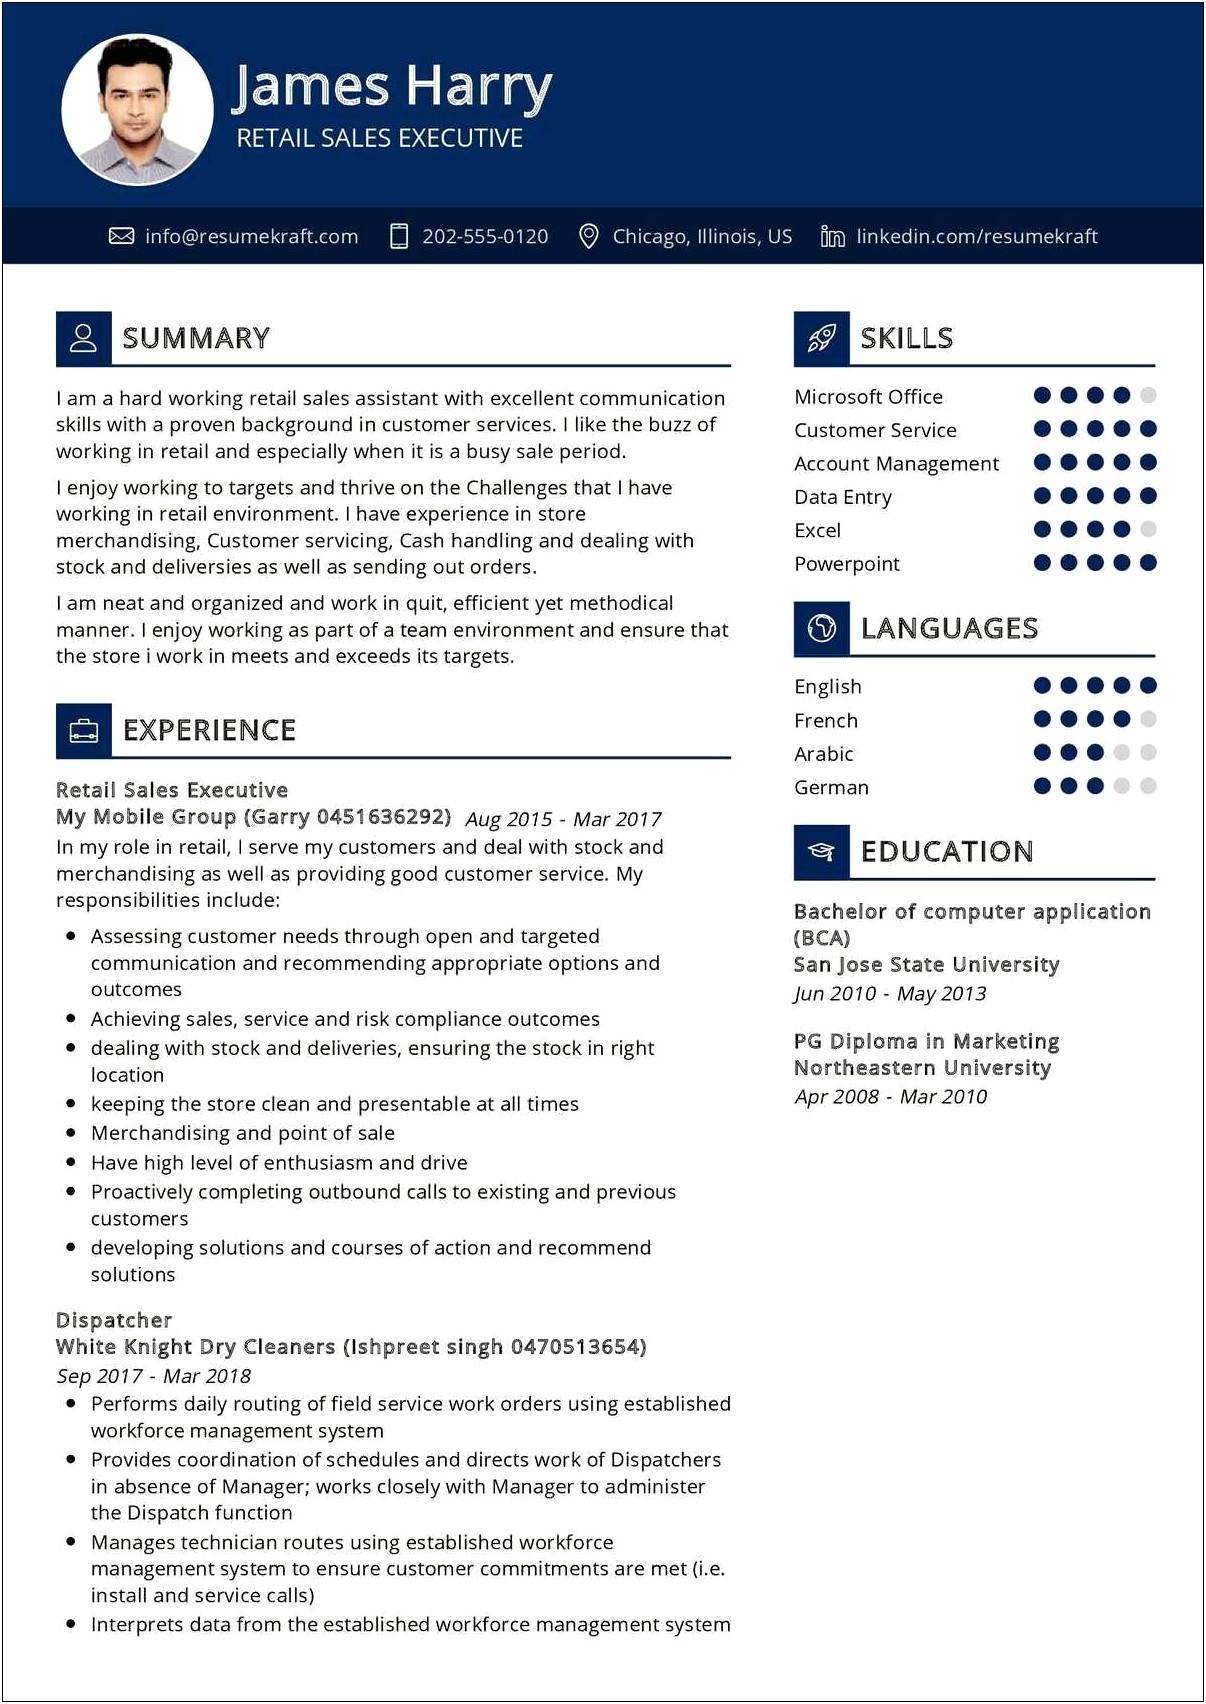 Long Absence From Work Force Resume